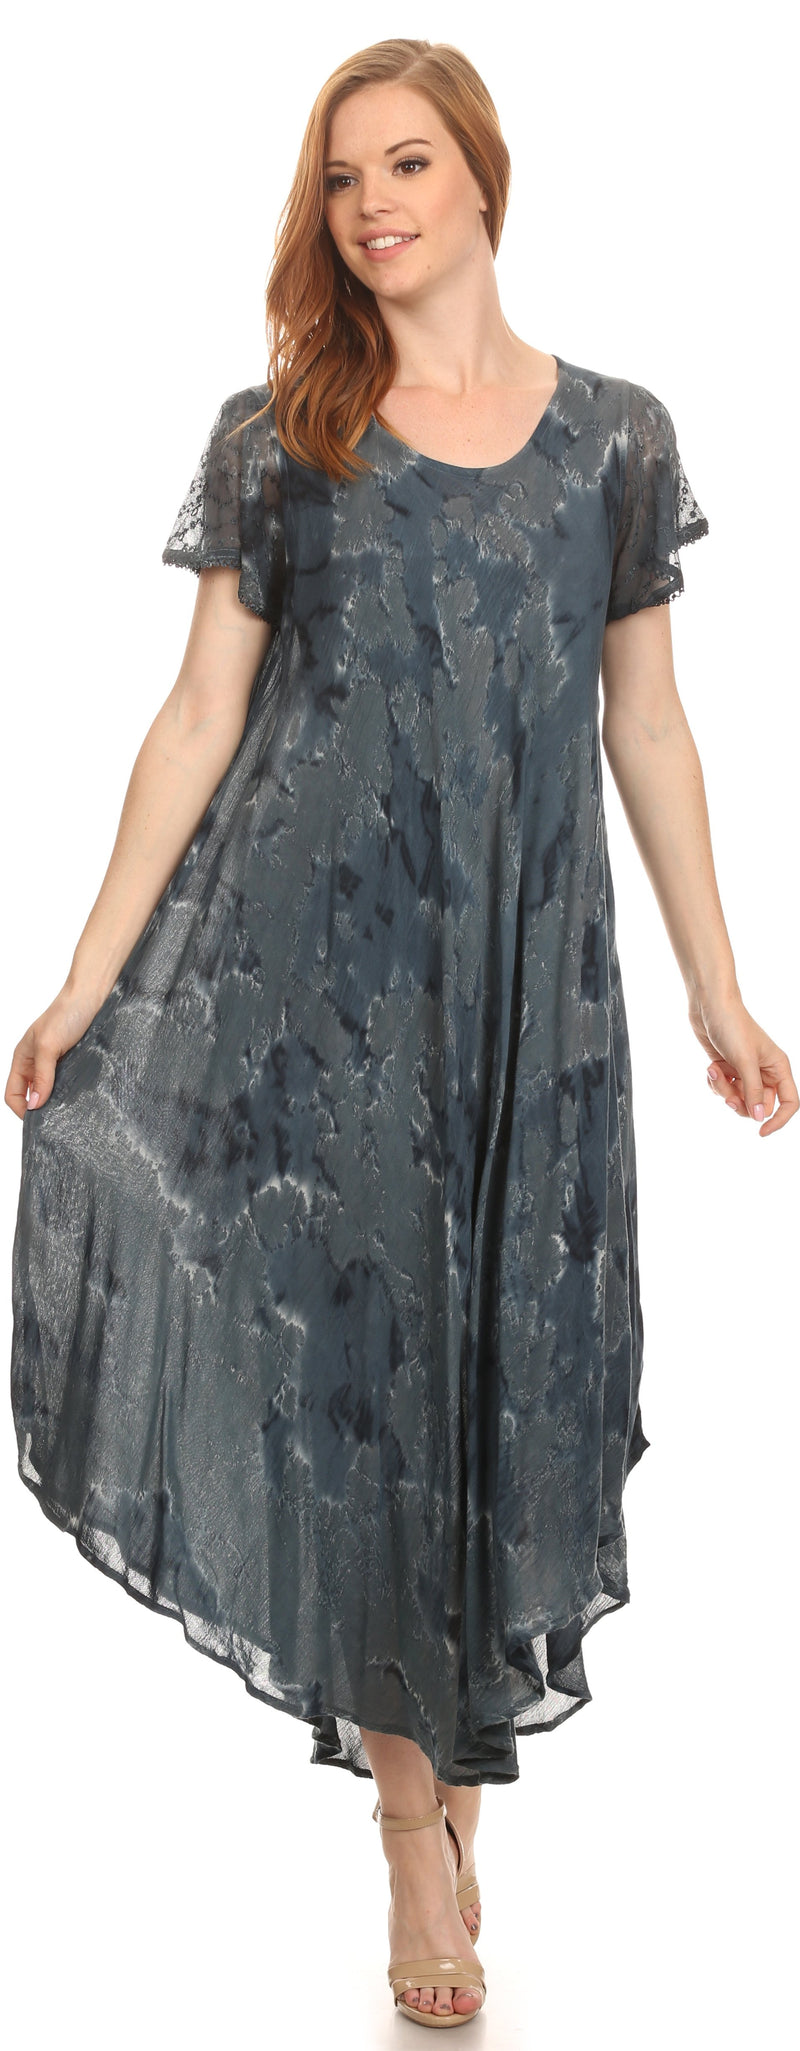 Sakkas Sayli Long Tie Dye Cap Sleeve Embroidered Wide Neck Caftan Dress / Cover Up